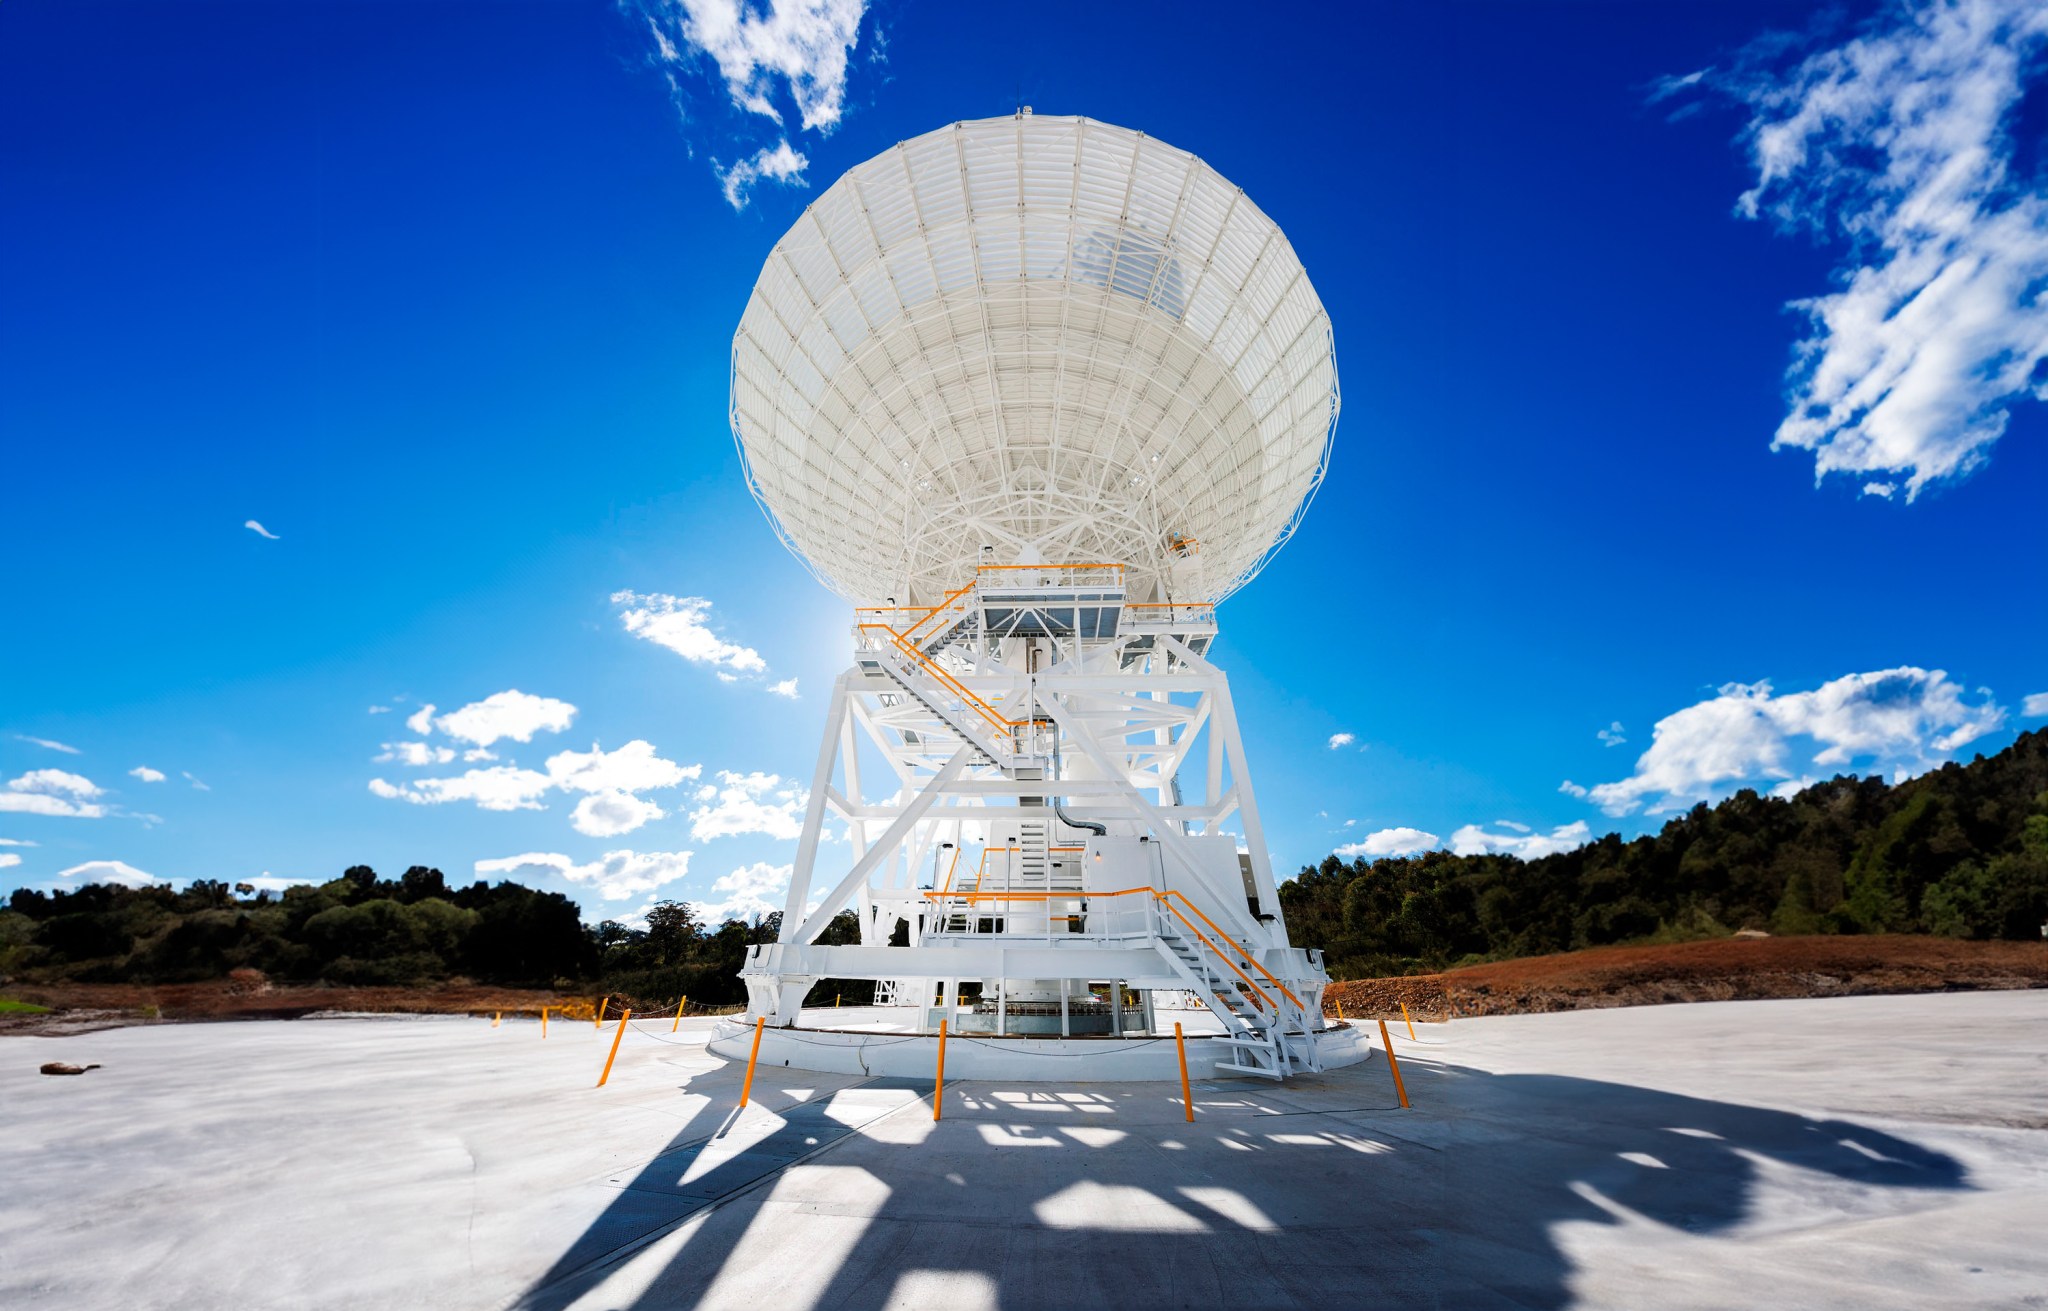 New Deep Space Network Antenna is Operational - NASA